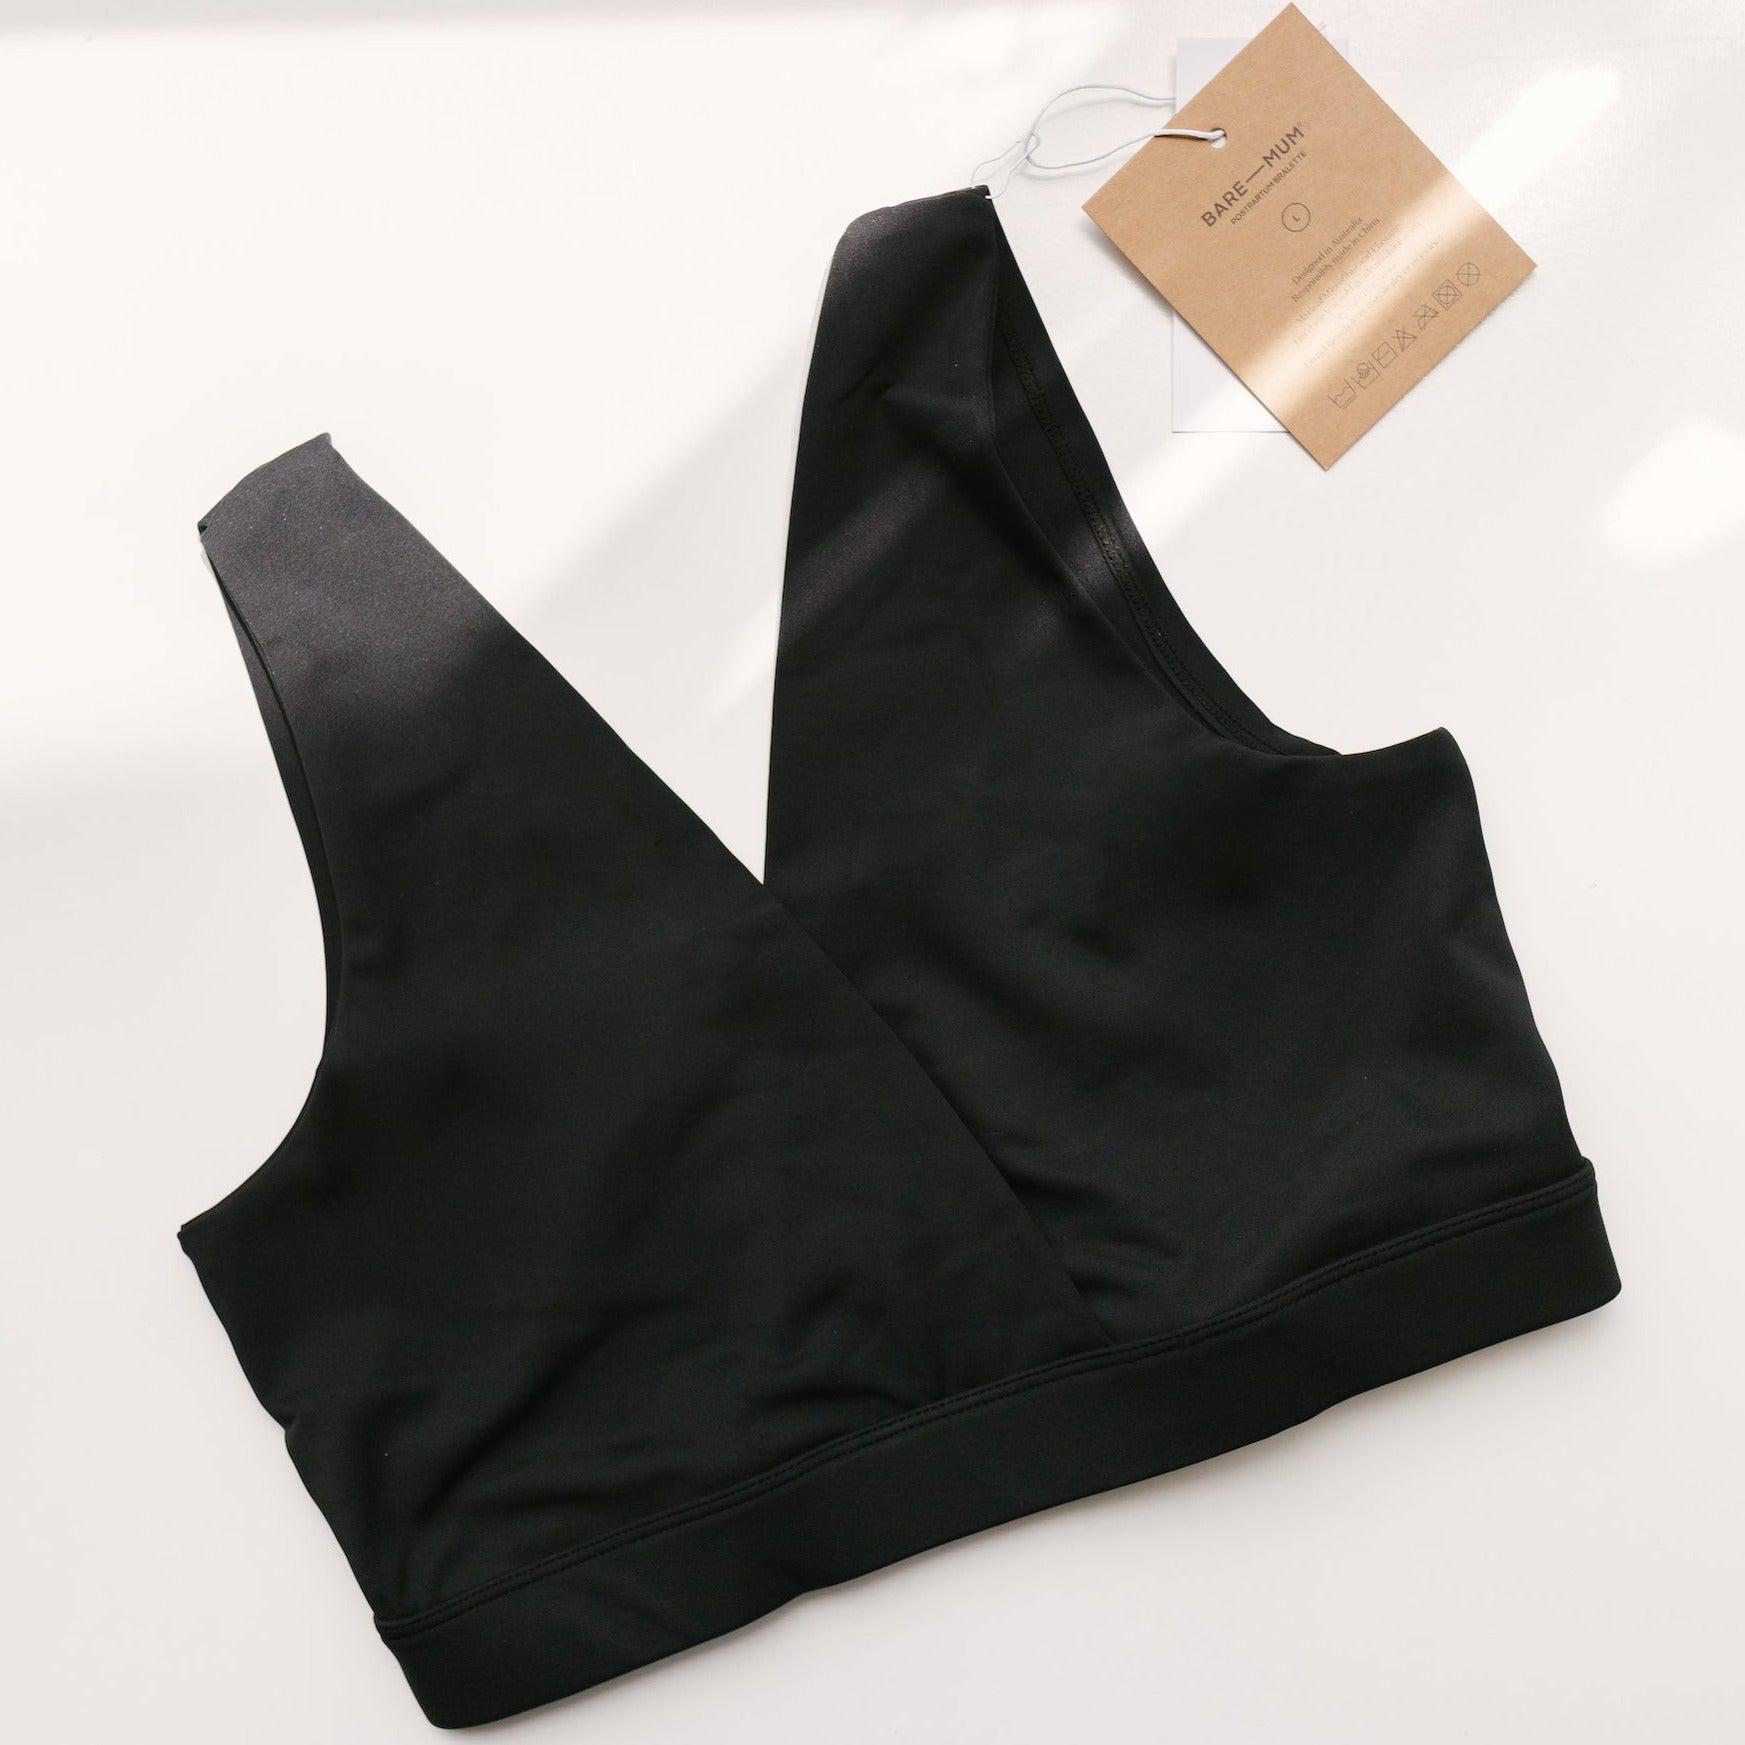 A black Postpartum Bralette from Bare Mum with a tag on it.